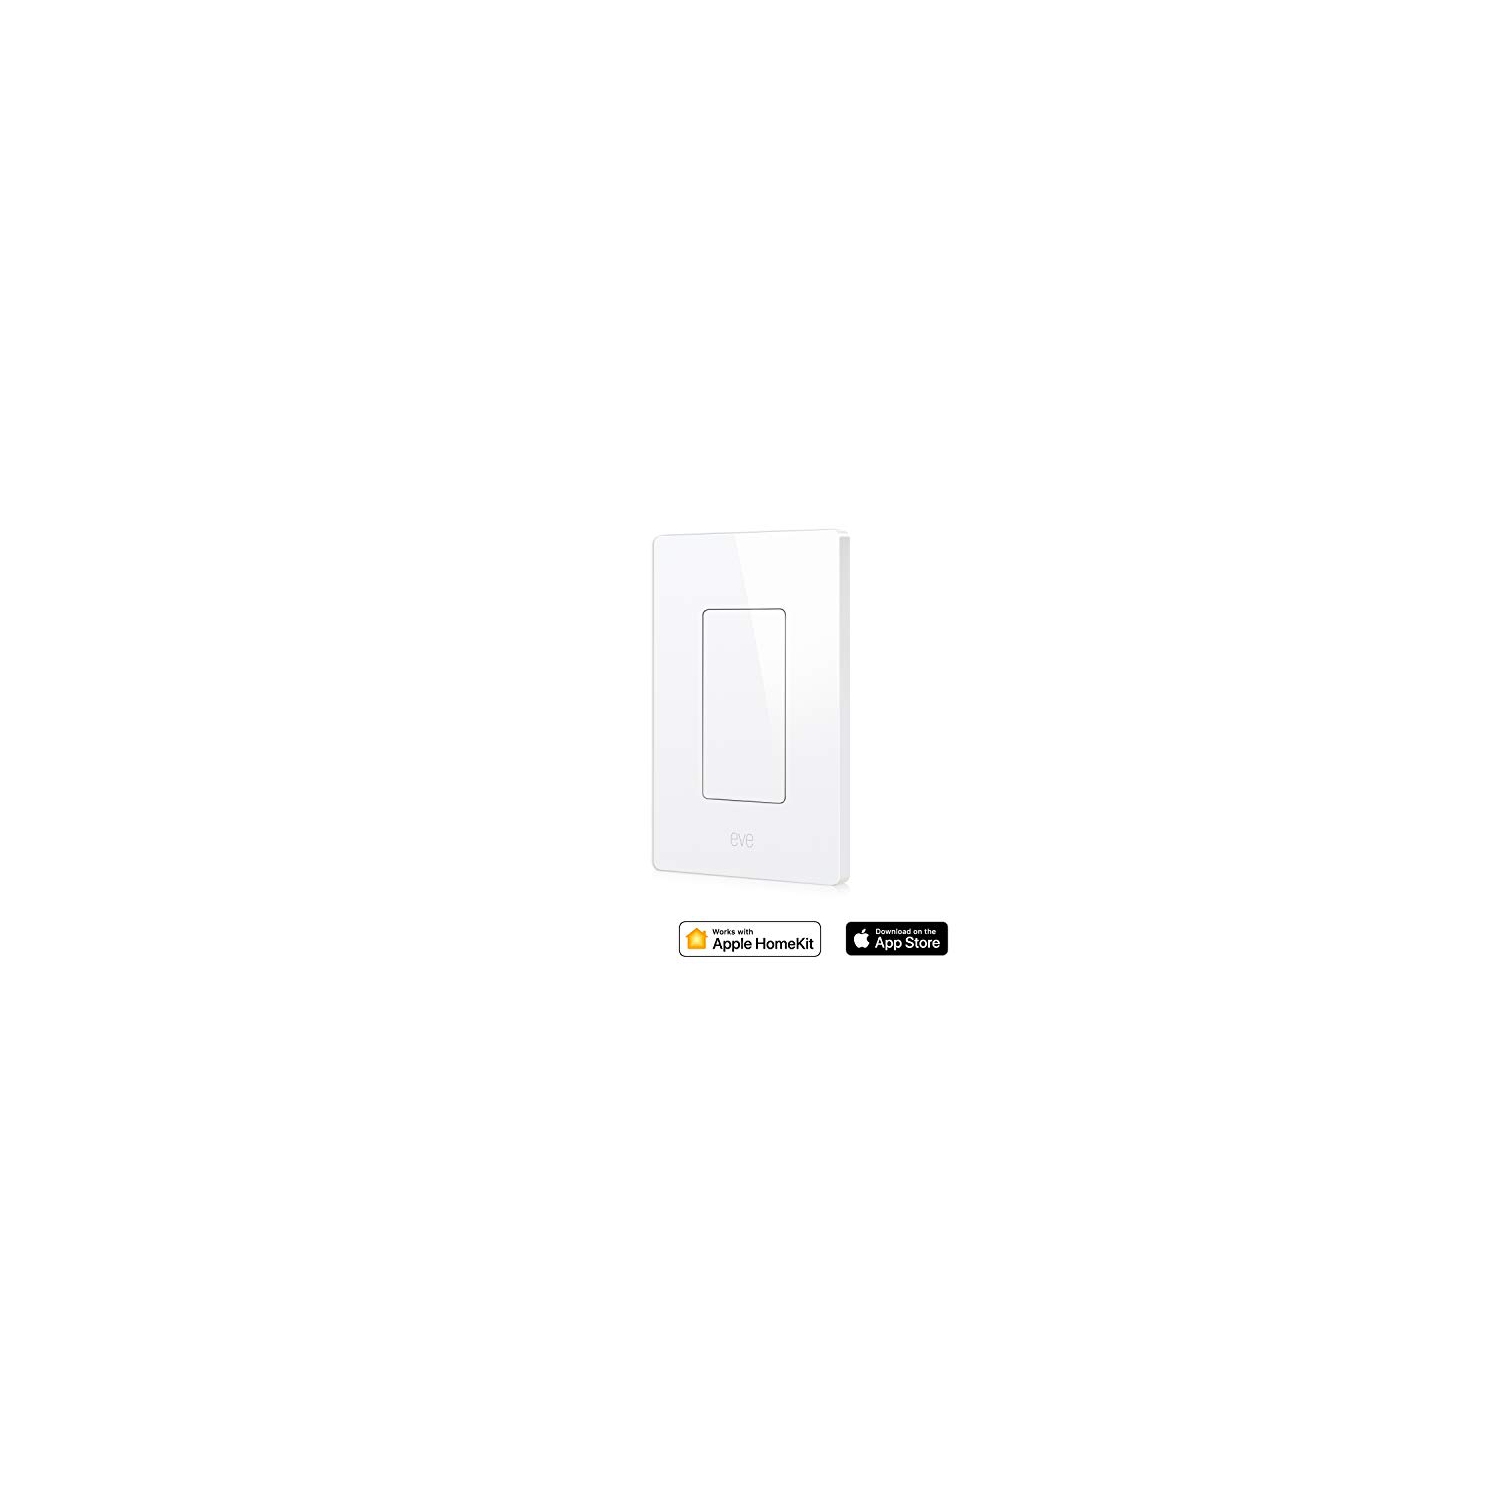 Eve Light Switch Apple HomeKit - Smart Home Light Switch for Automating Lighting with Schedules & App Control